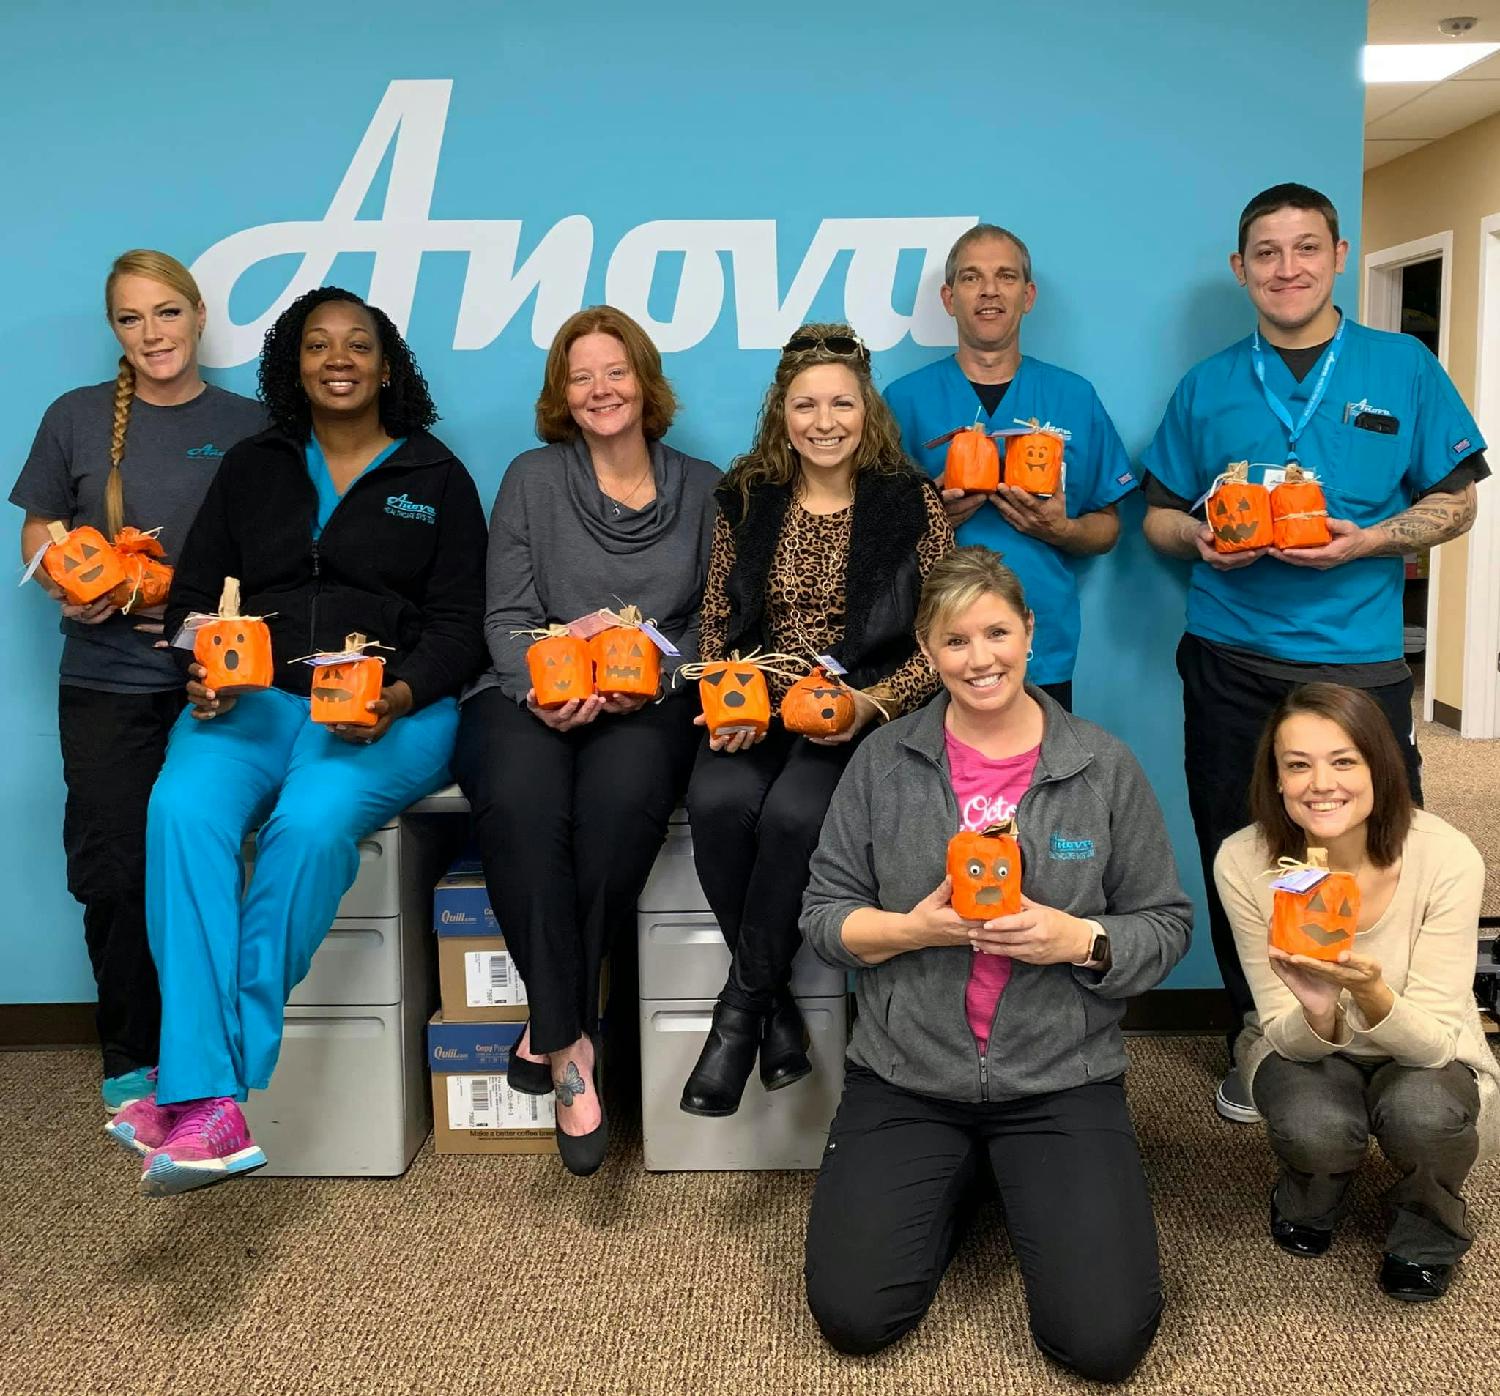 Anova Team made pumpkins for Hospice Patients